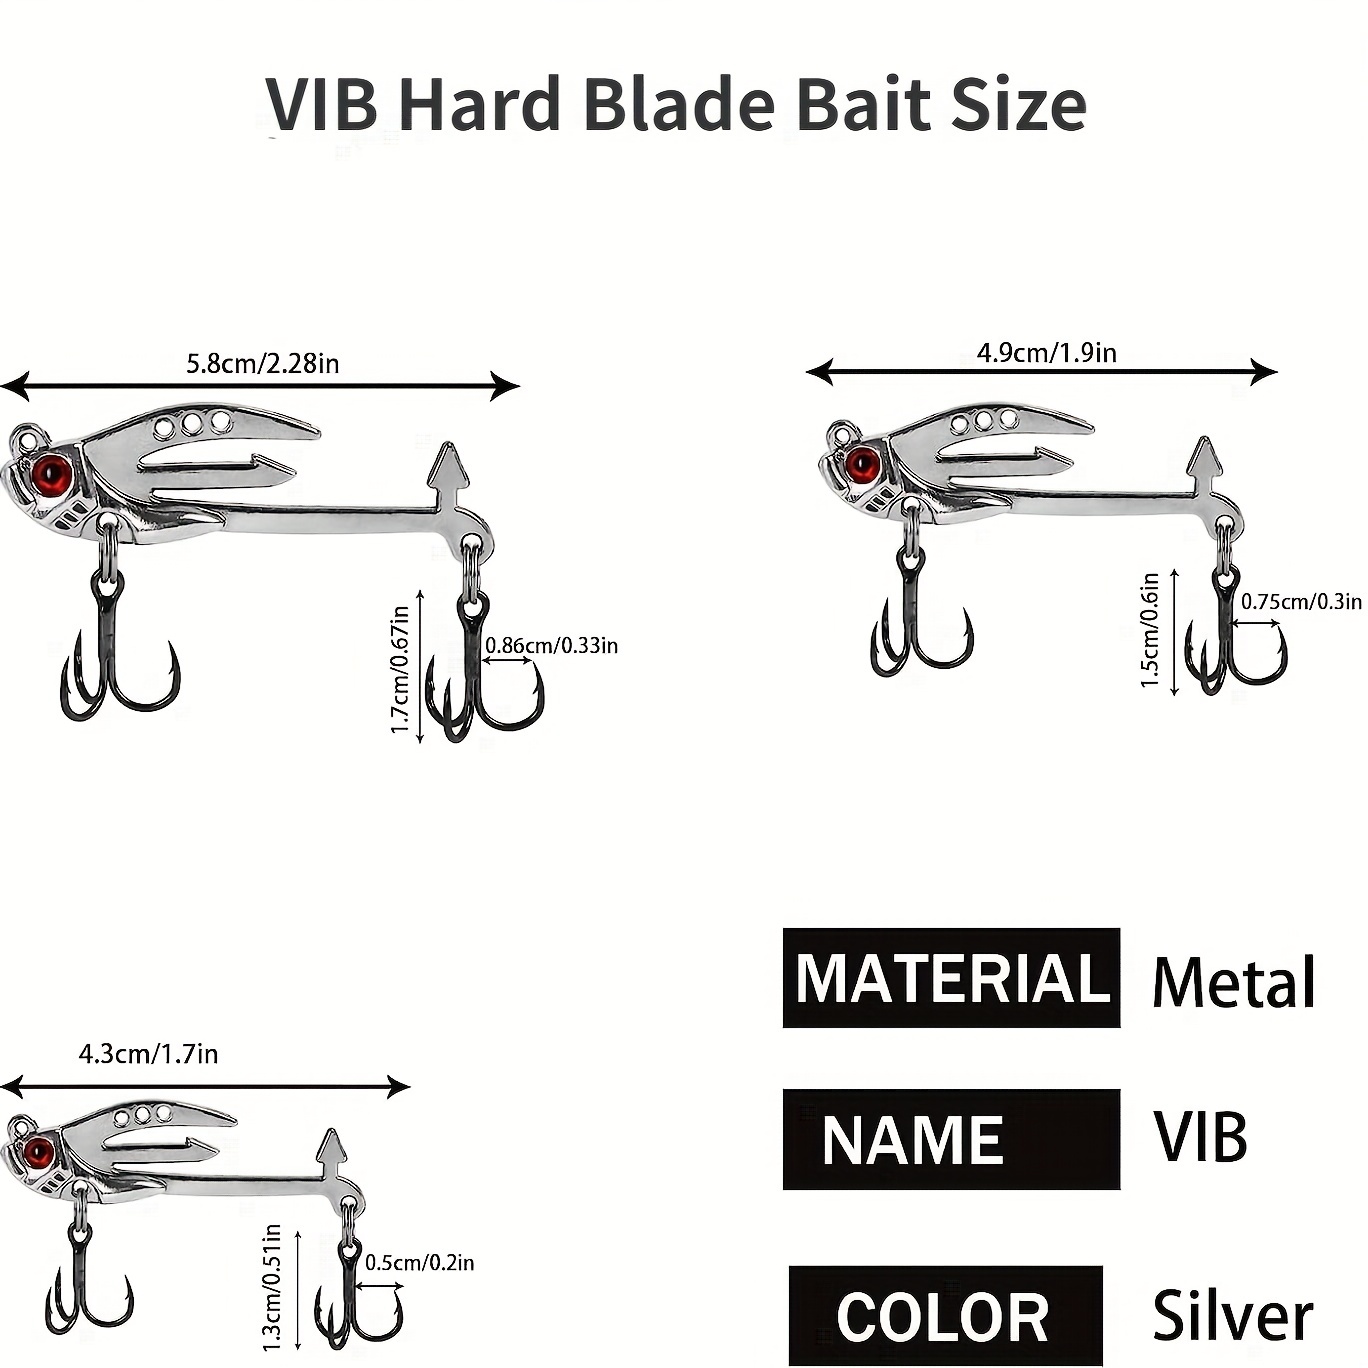 1pc Blade Baits With Head Jig, 5g Metal VIB Hard Blade Bait, Fishing Spoon  Lures For Freshwater Saltwater Bass Walleyes Trout Crappie